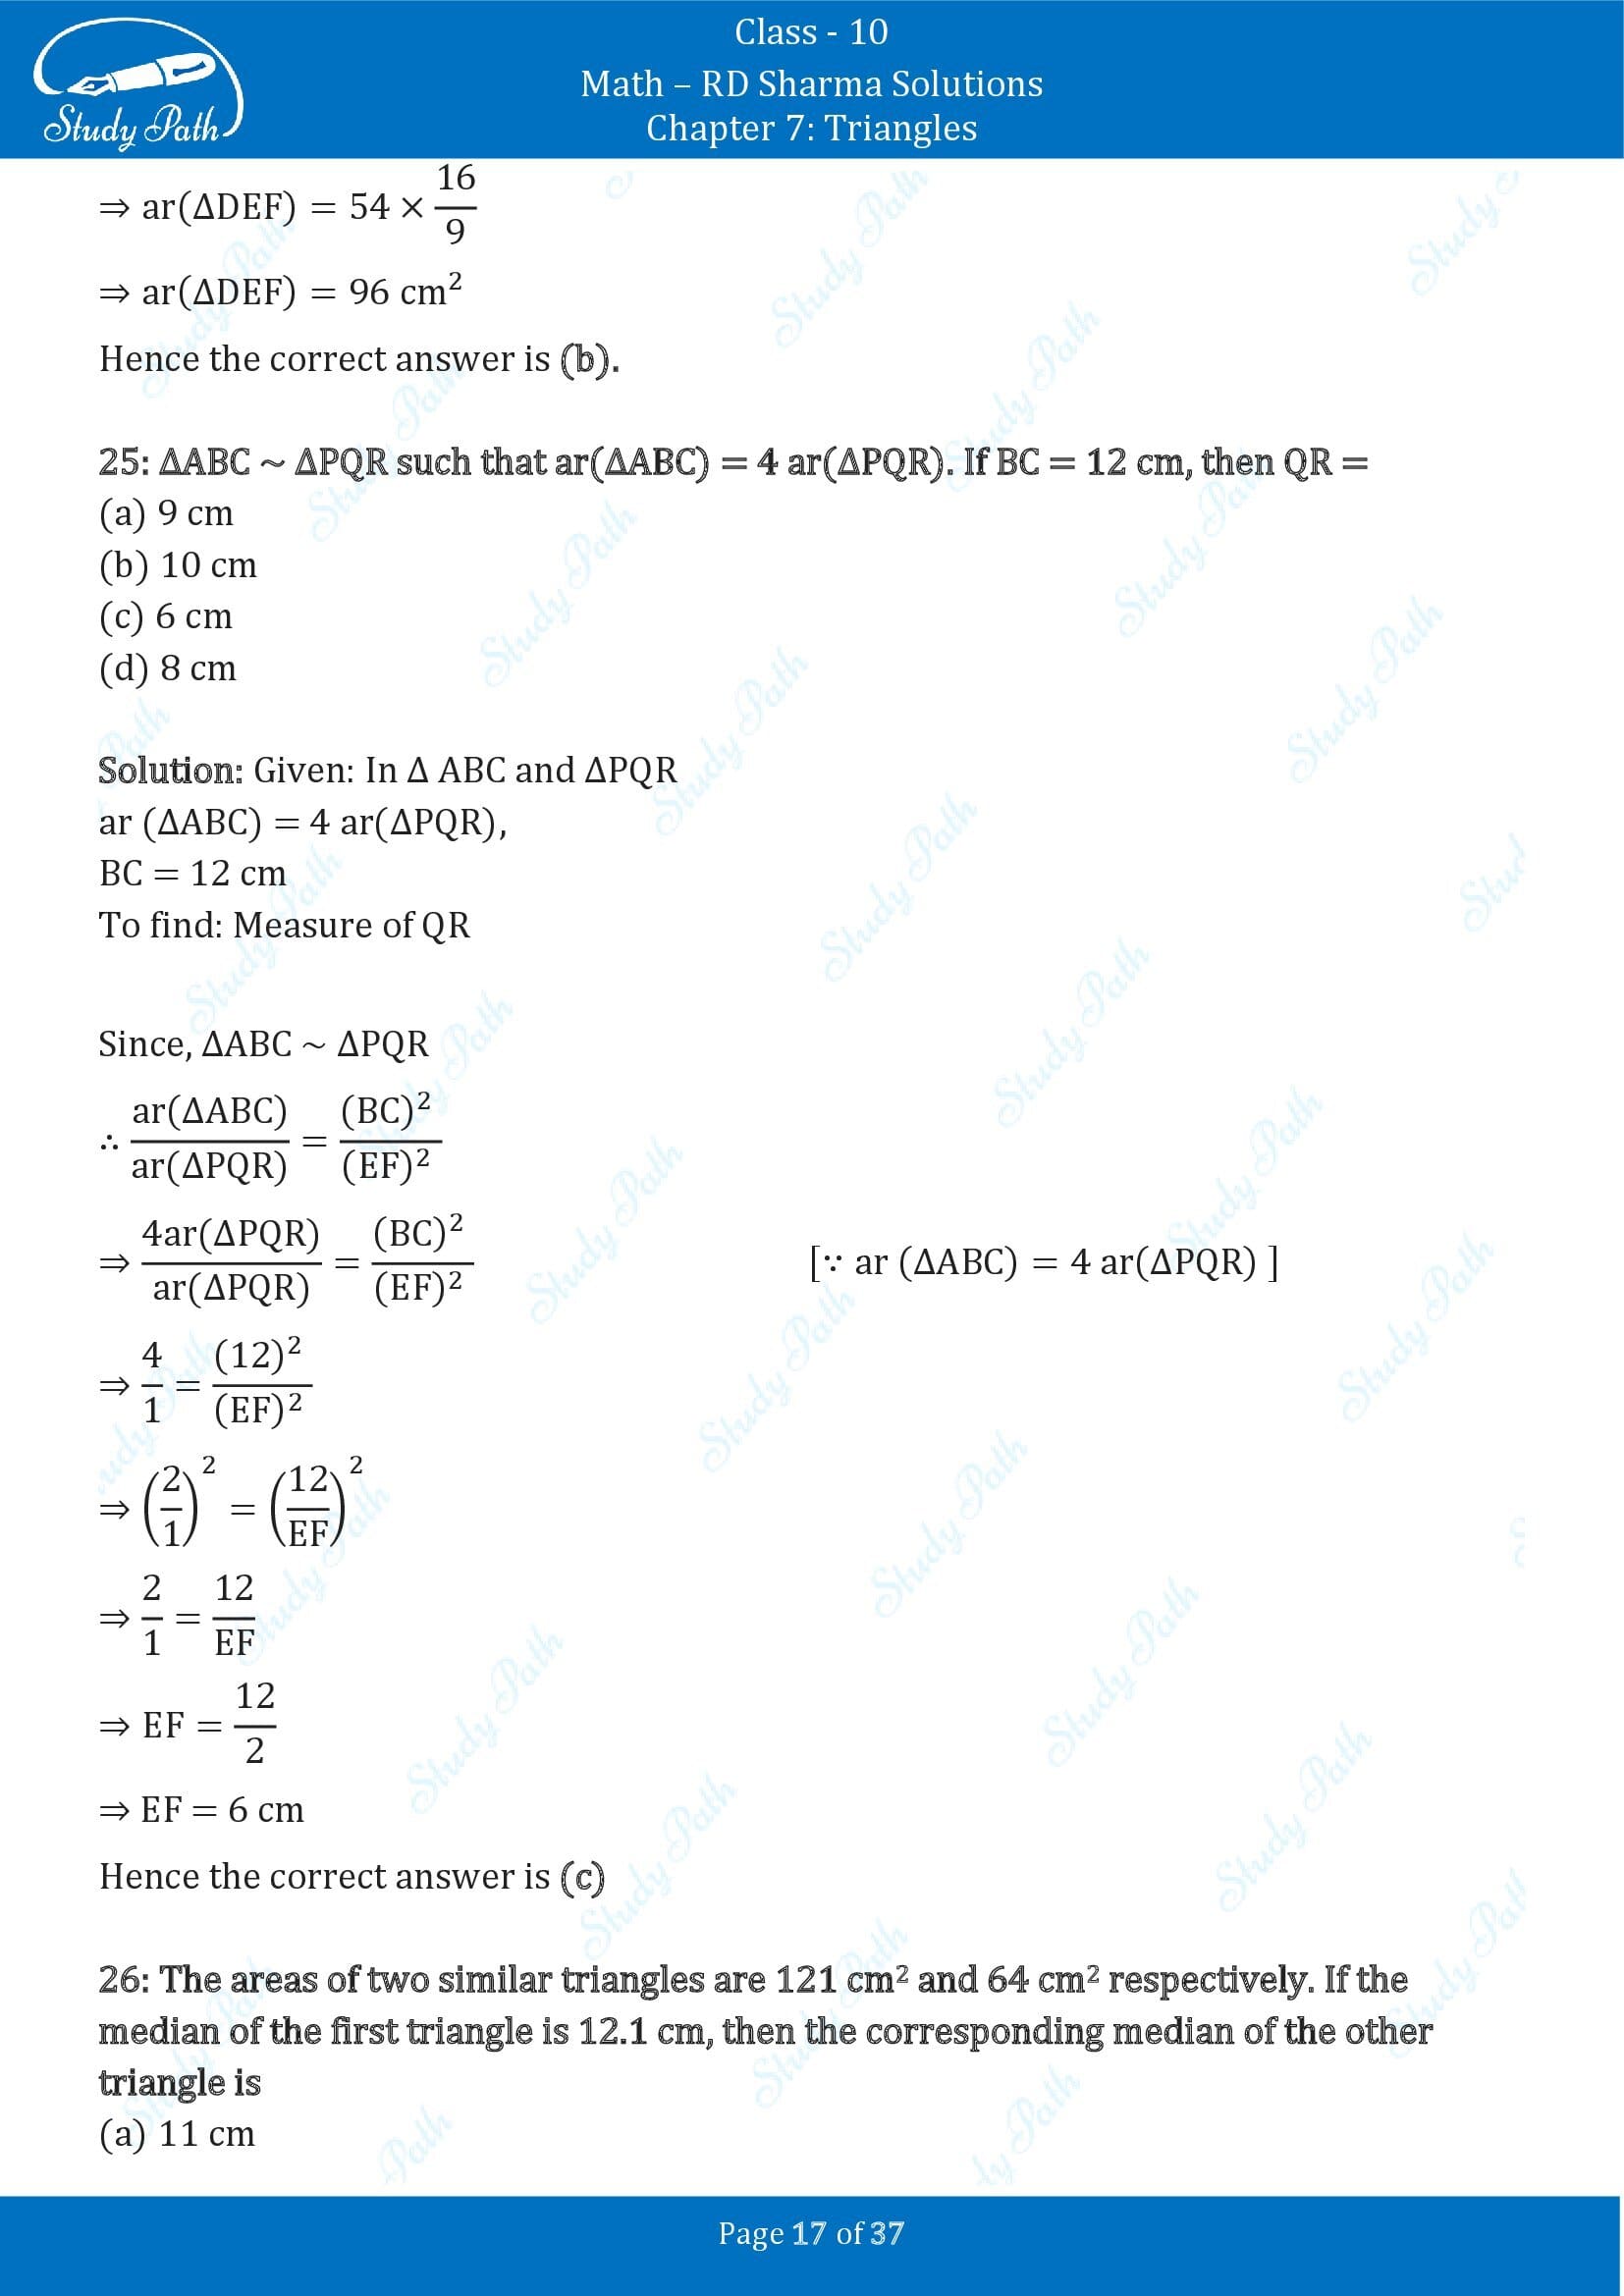 RD Sharma Solutions Class 10 Chapter 7 Triangles Multiple Choice Question MCQs 00017